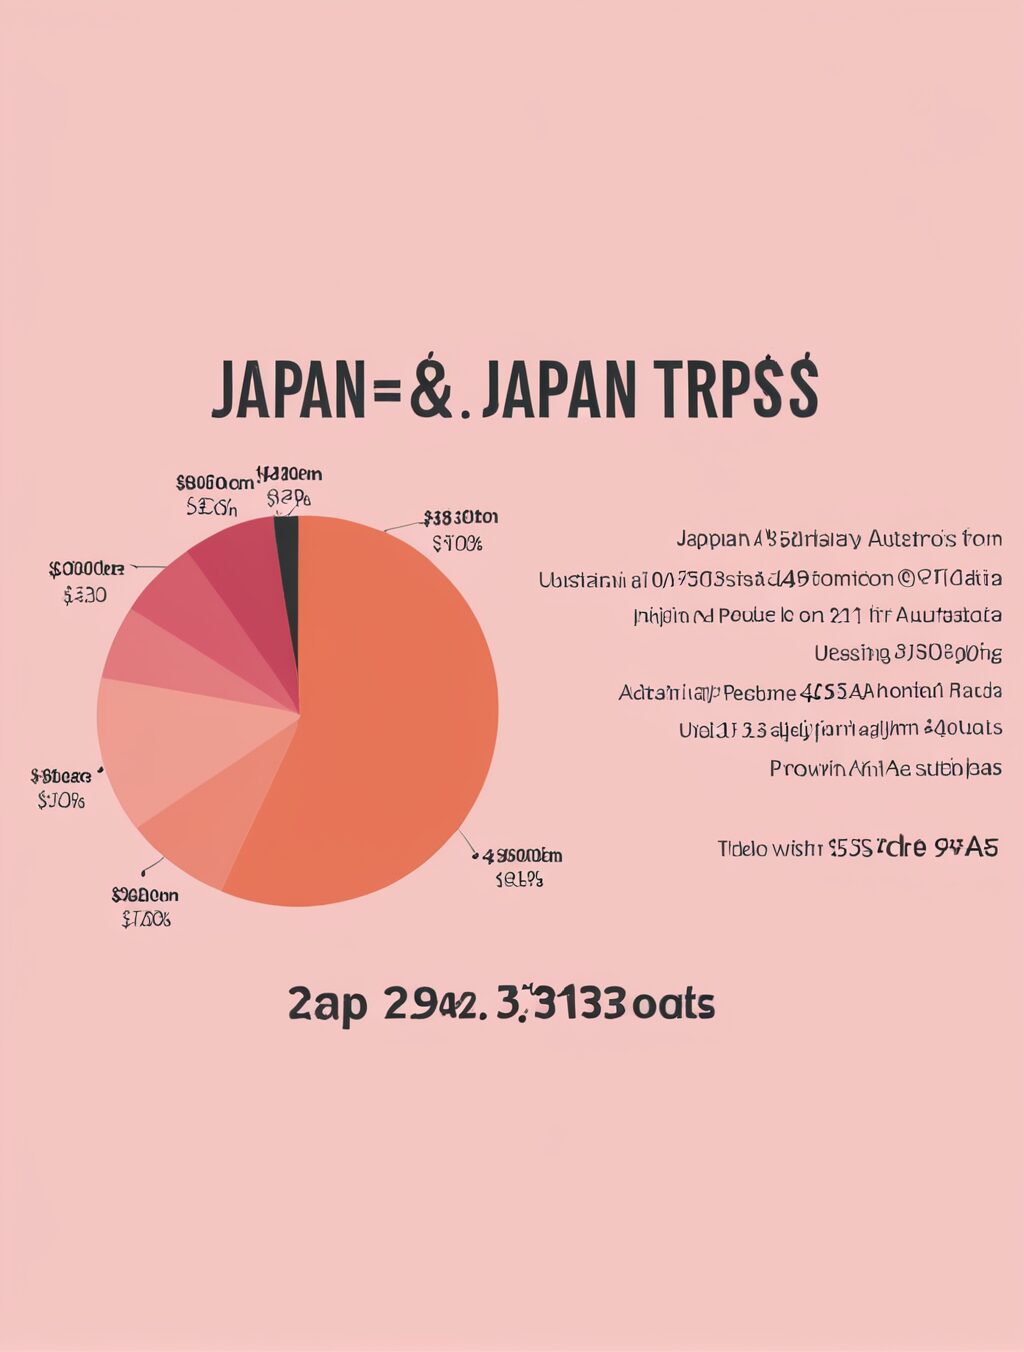 japan trip cost from australia